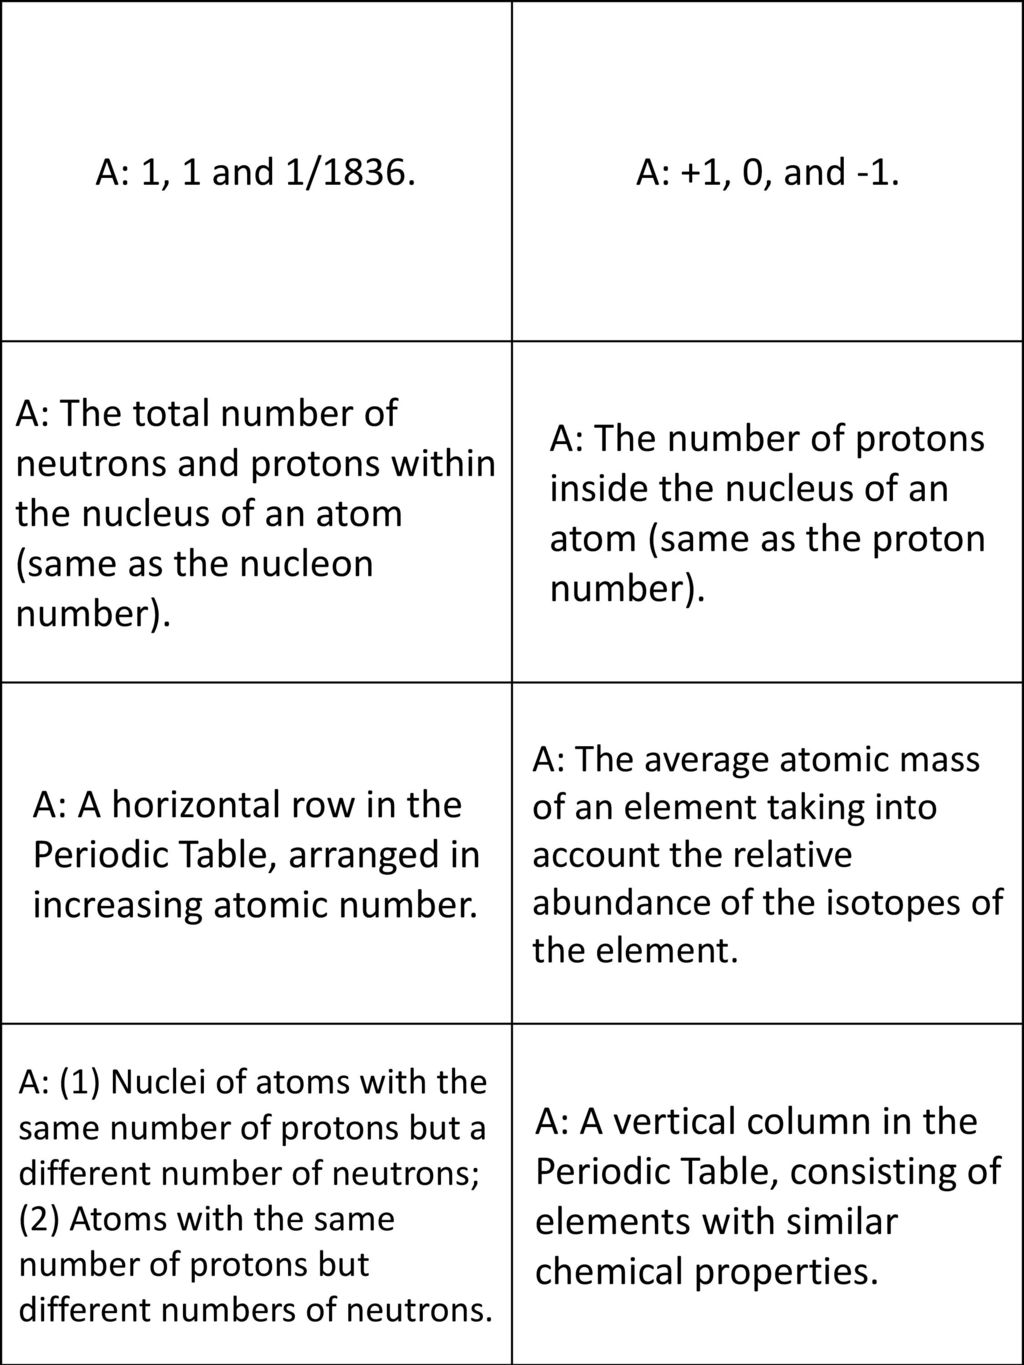 A: 1, 1 and 1/1836. A: +1, 0, and -1. A: The total number of neutrons and protons within the nucleus of an atom (same as the nucleon number).